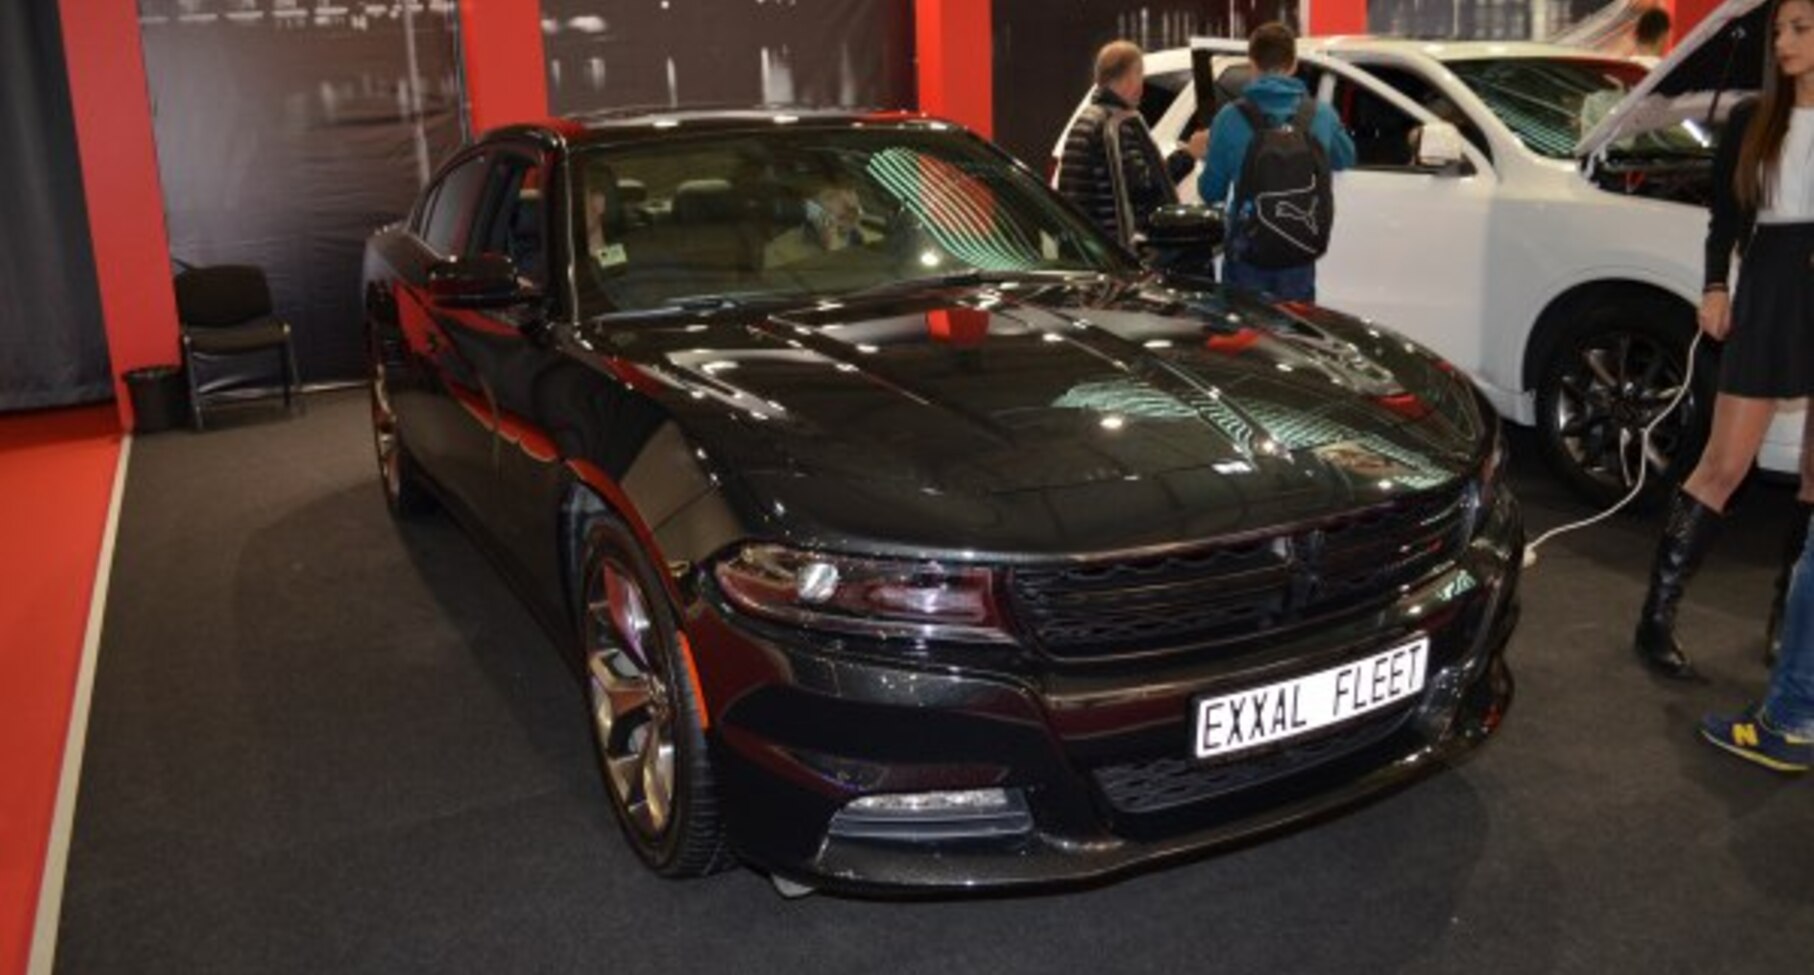 Dodge Charger VII (LD; facelift 2015) R/T 5.7 HEMI V8 (370 Hp) Automatic 2015, 2016, 2017, 2018 